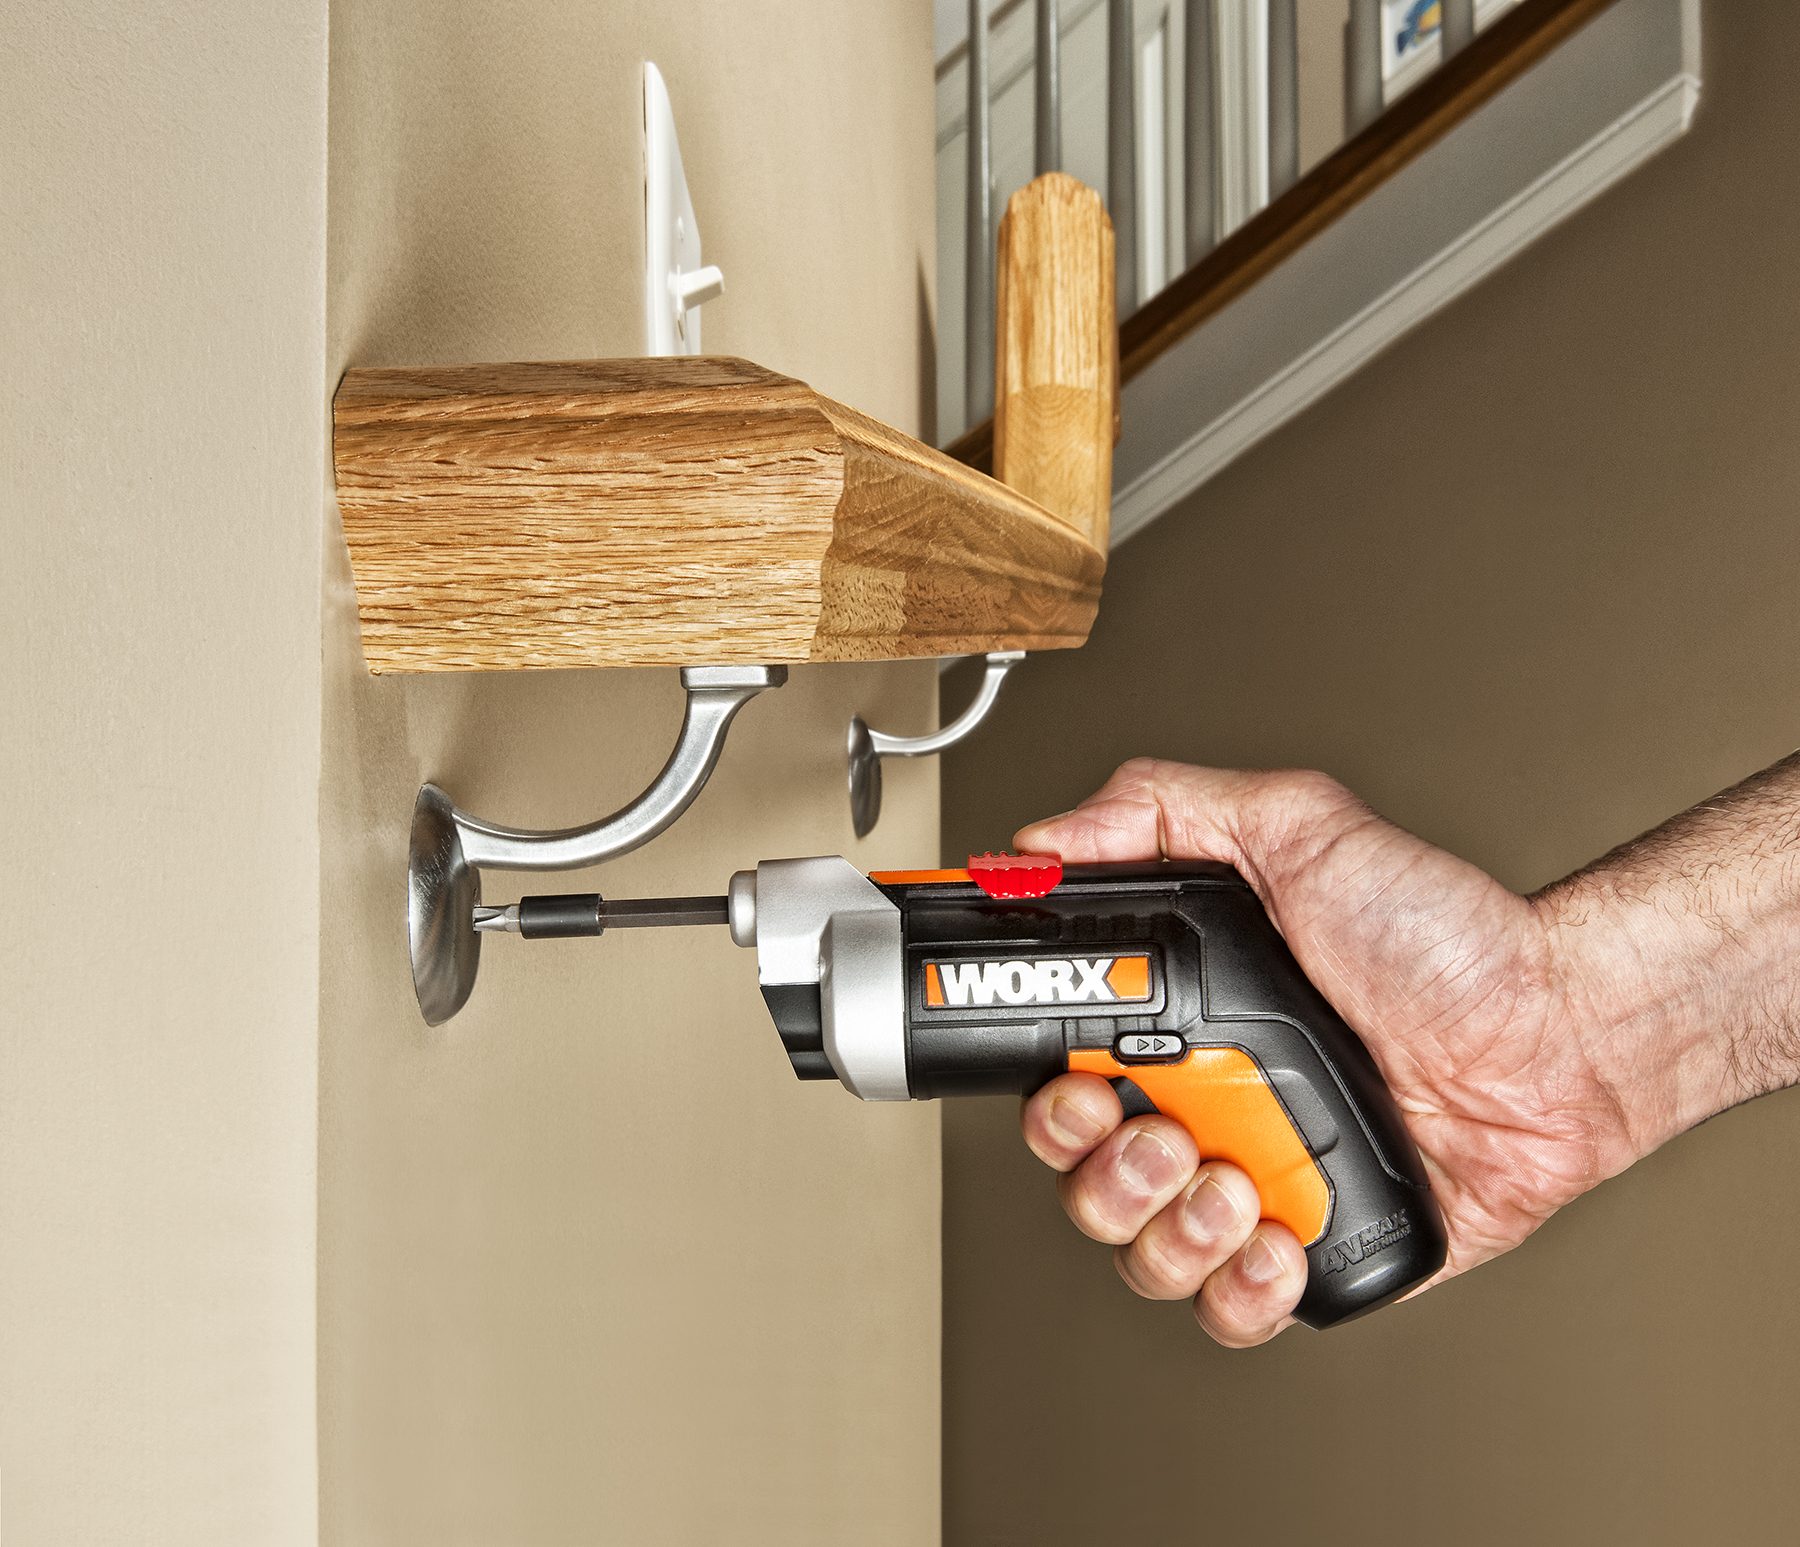 WORX XTD Driver has extendable drive shaft to connect with hard-to-reach fasteners.